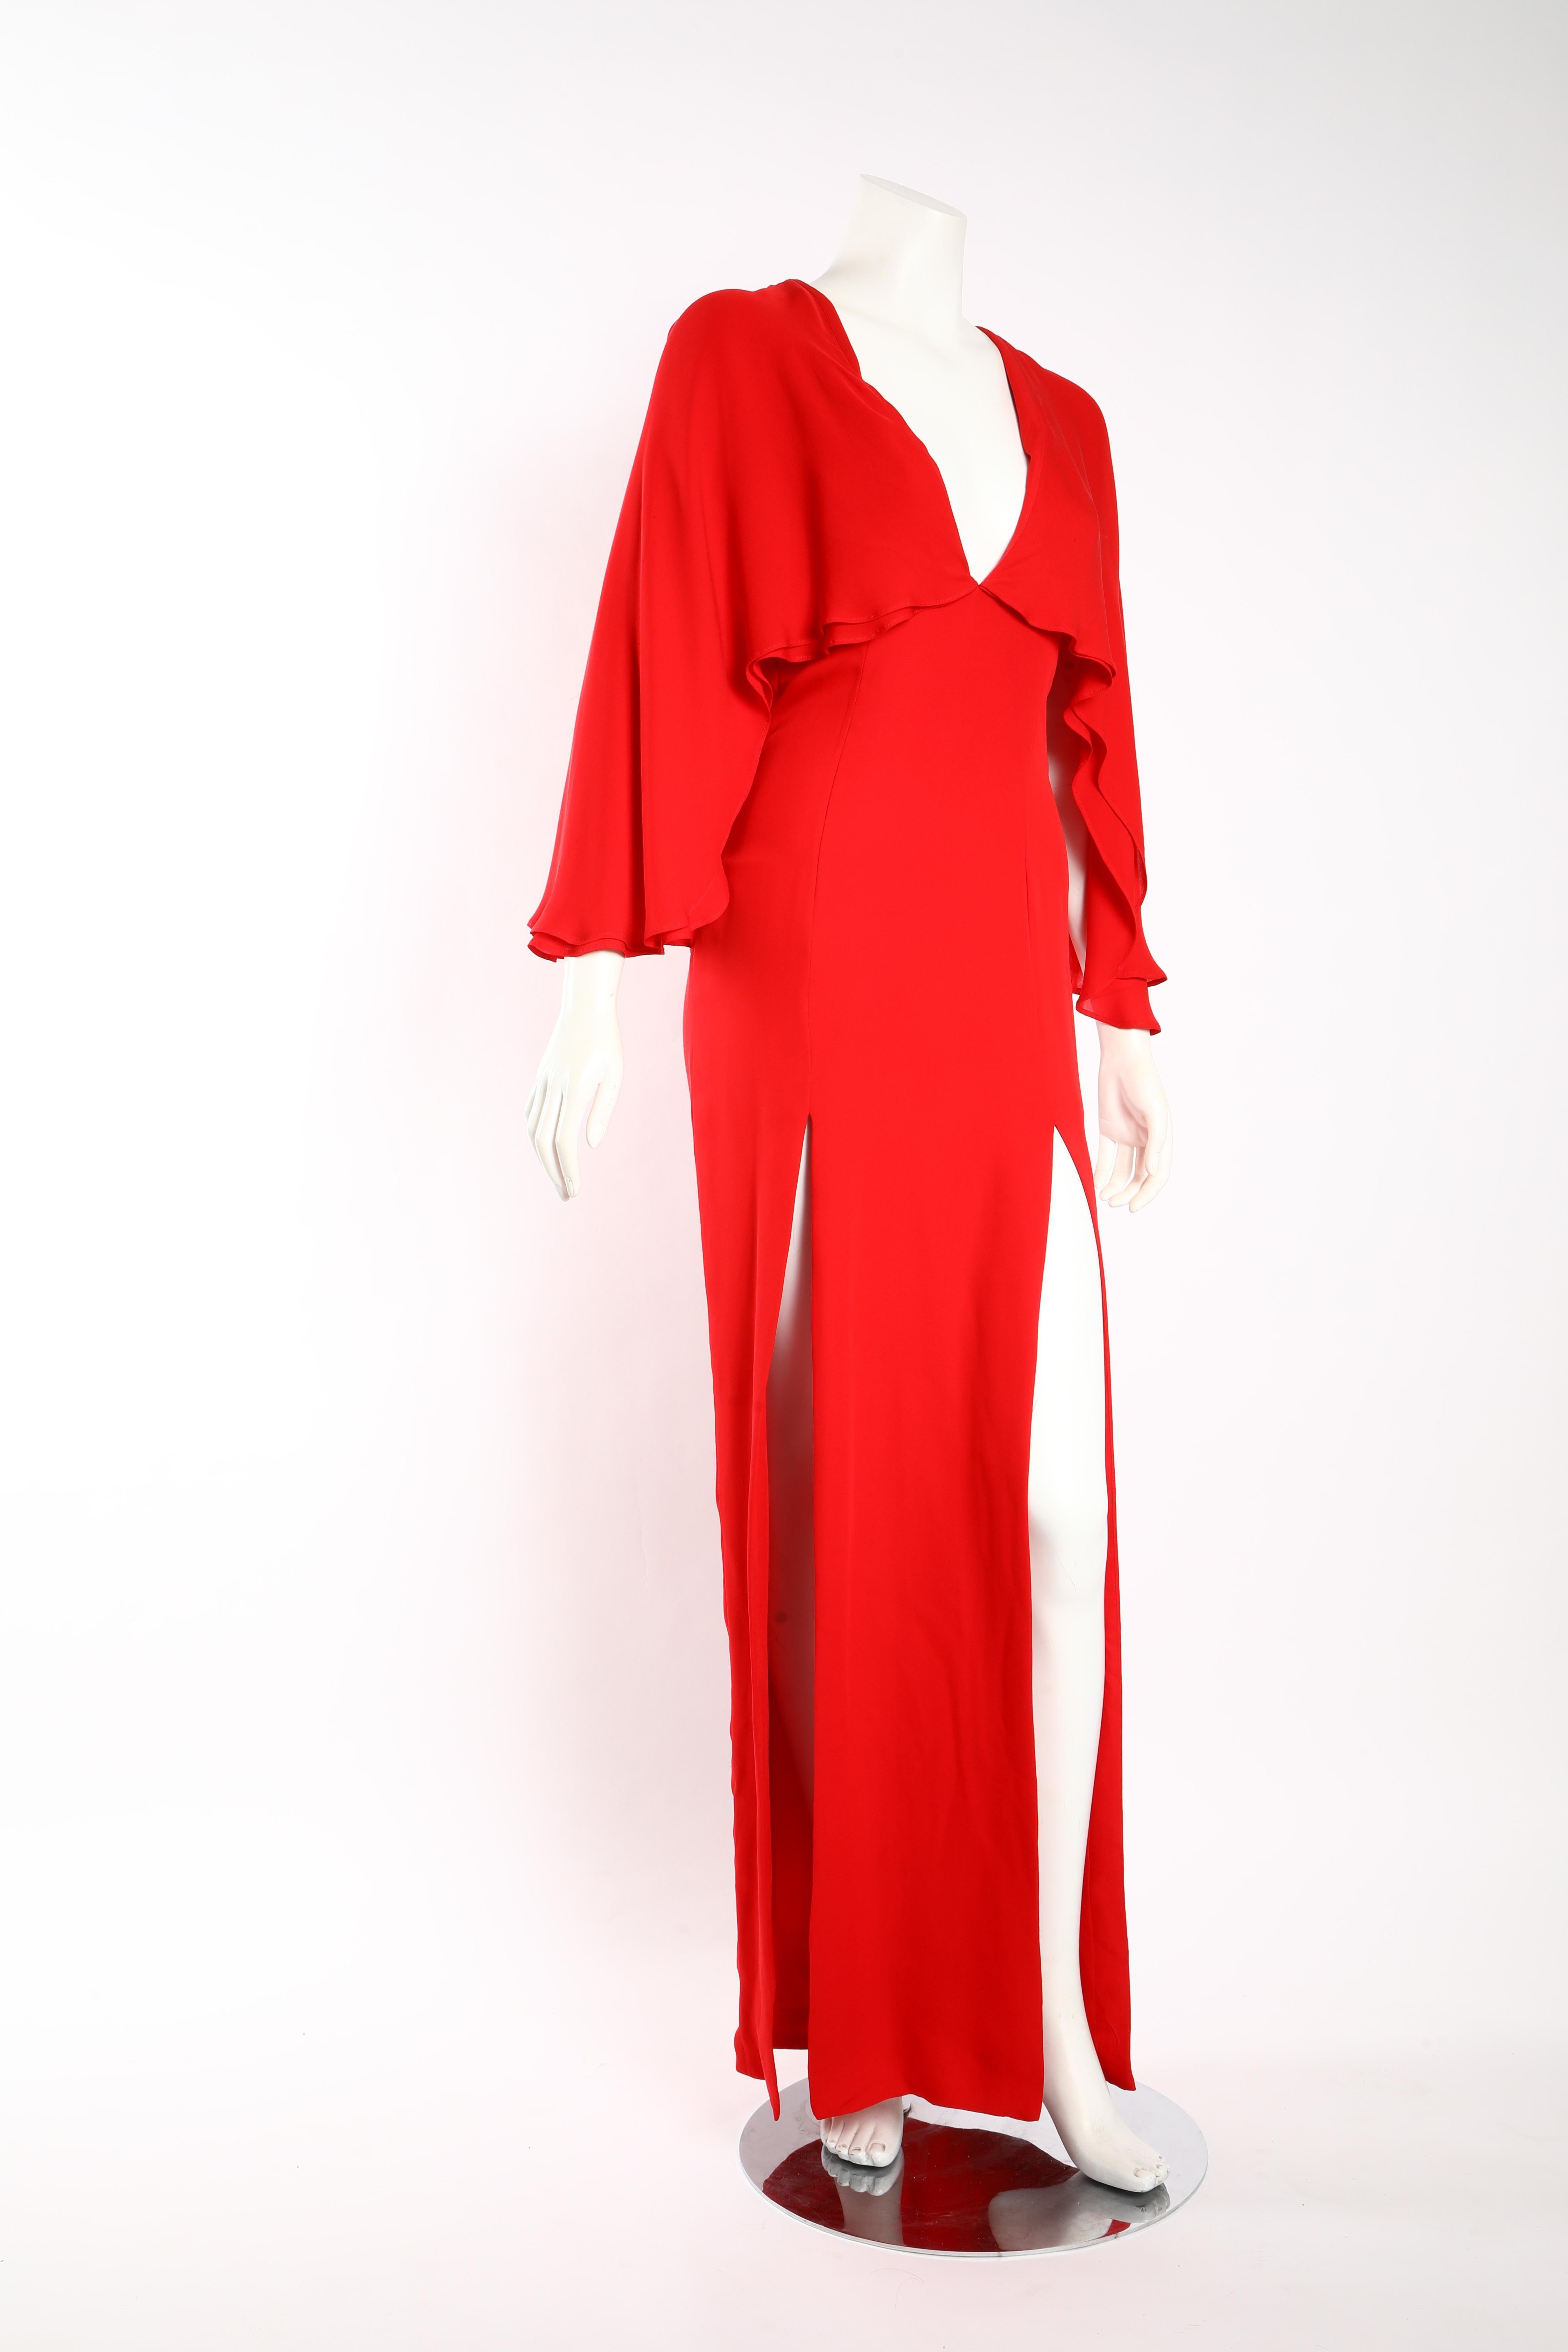 Haney silk chiffon gown in blood red with double layered cape back and two deep slits. Features deep-v neckline. Size US 6. 